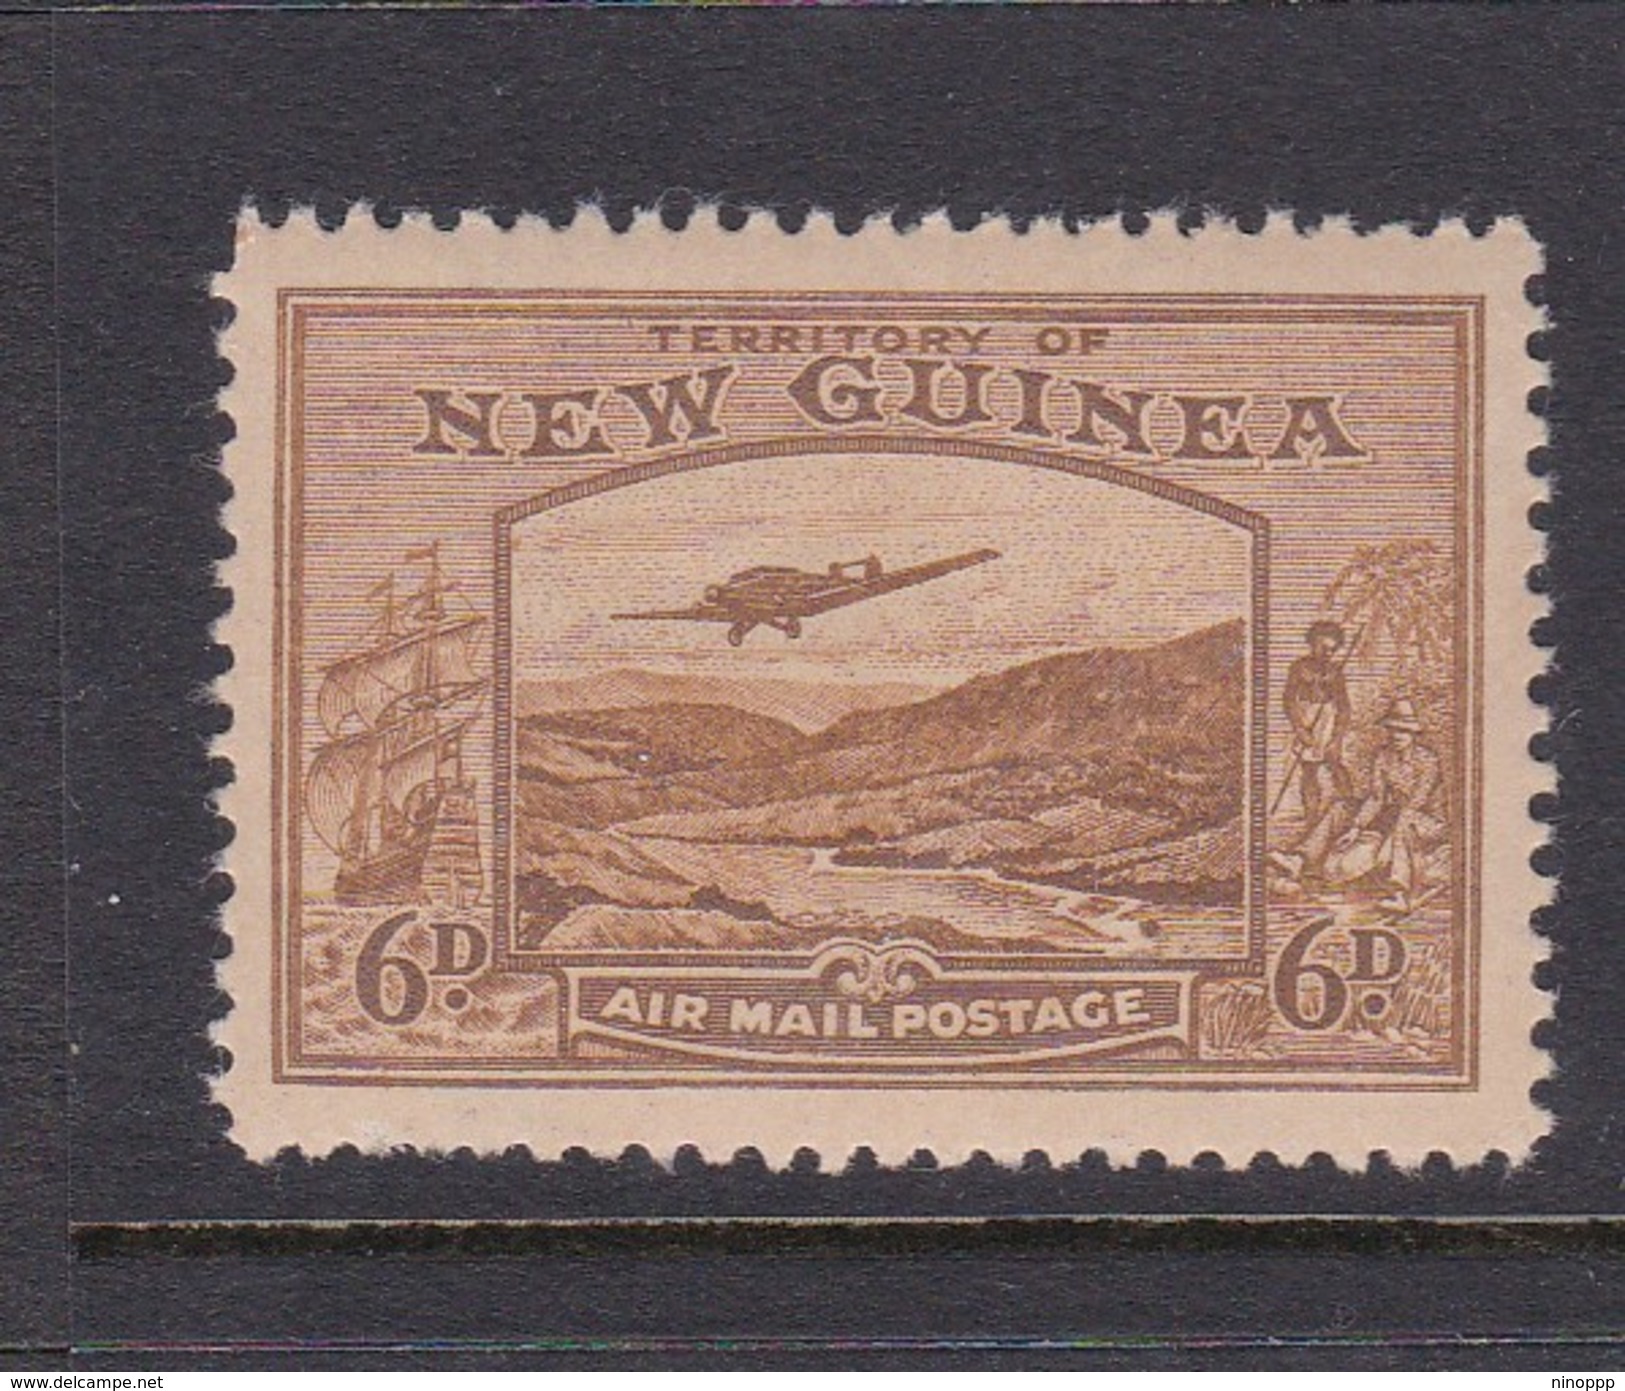 New Guinea SG 219 1939 Bulolo Goldfields Six Pennies Bistre-Brown Mint Never Hinged - Papua New Guinea